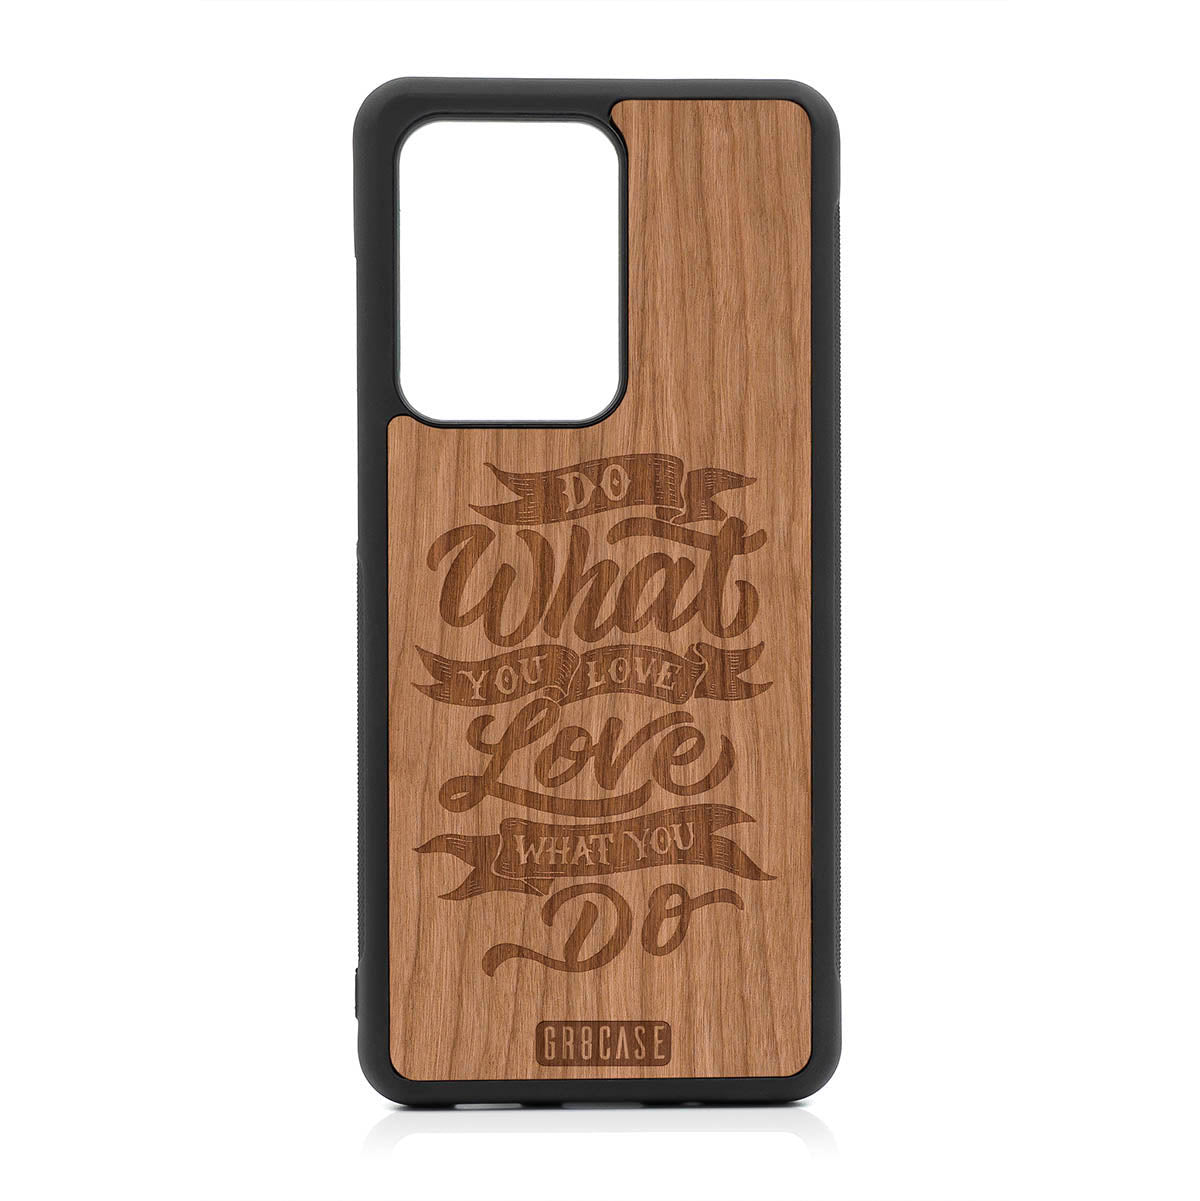 Do What You Love Love What You Do Design Wood Case For Samsung Galaxy S20 Ultra by GR8CASE